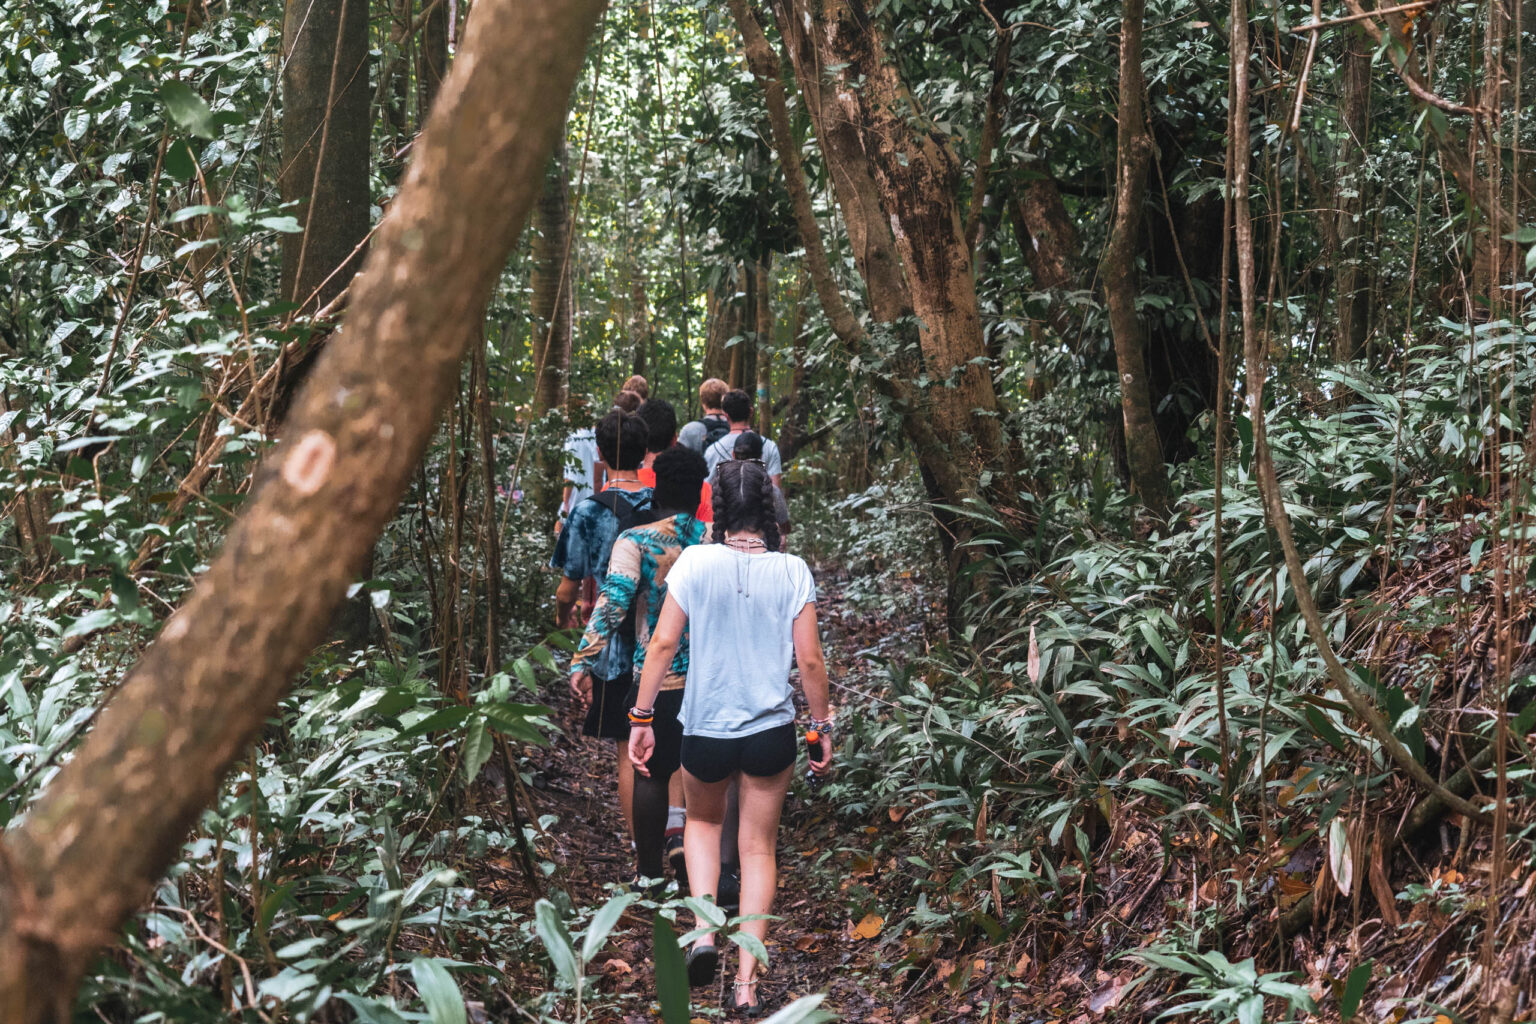 A group of people hiking through the jungle.